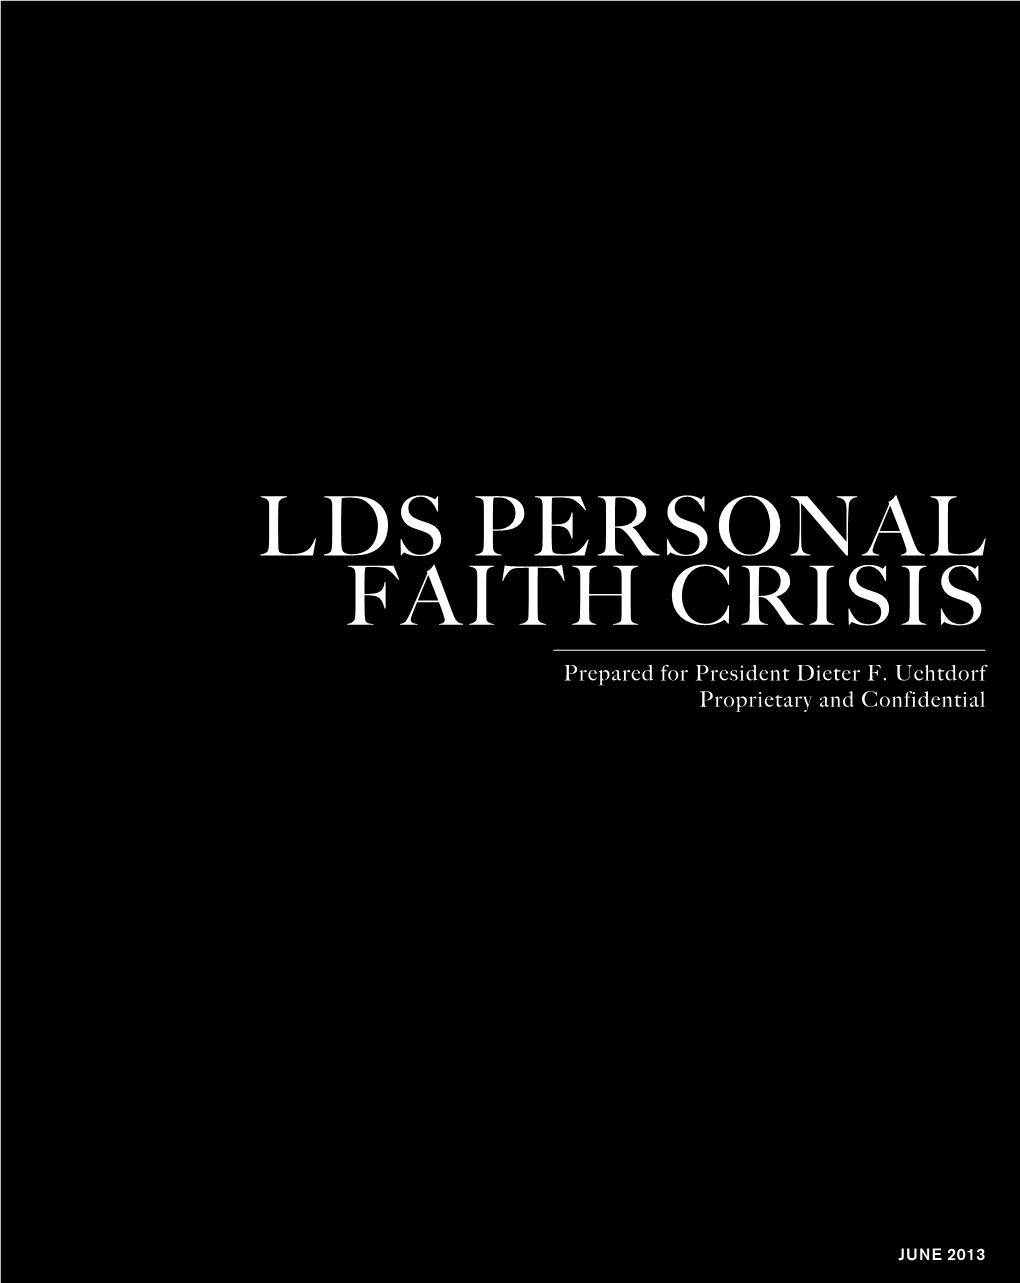 LDS PERSONAL FAITH CRISIS Prepared for President Dieter F